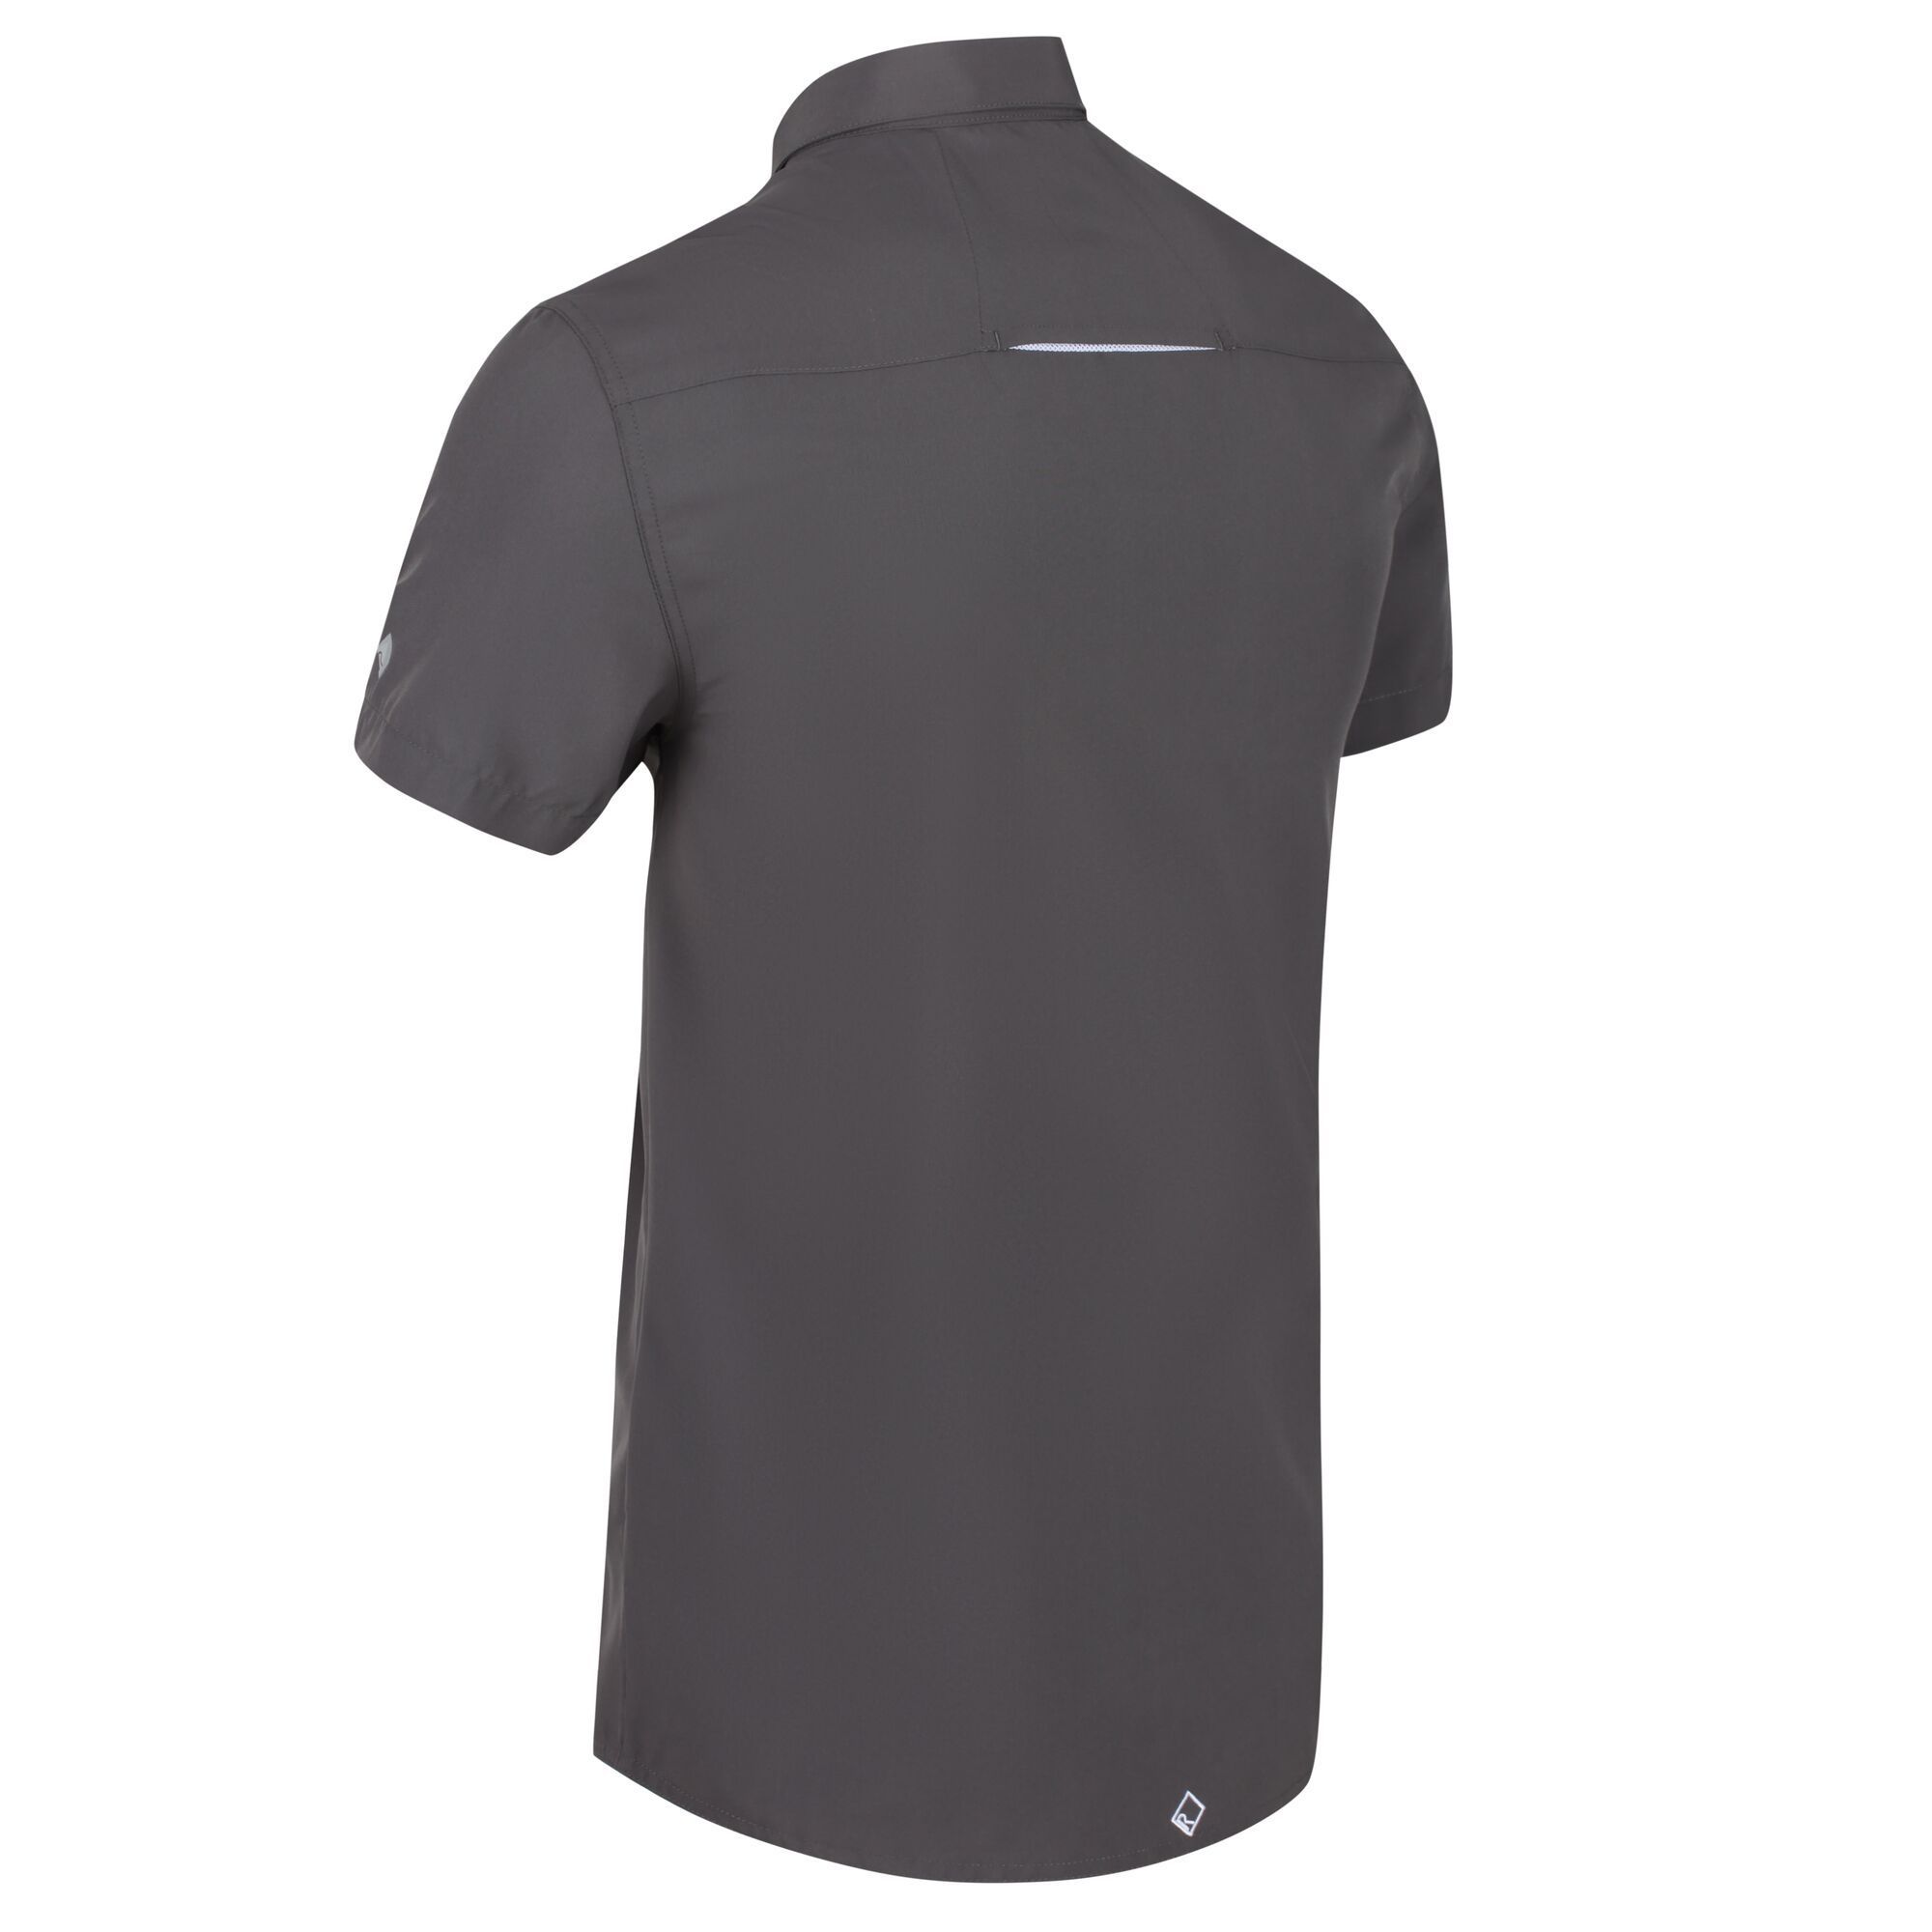 Material: 96% Polyester, 4% Elastane. Showerproof Isoflex short-sleeved shirt with airflow panels and durable water-repellent finish. Underarm mesh. Double layer collar. Trim, zipped chest pocket. Regatta logo on left arm.